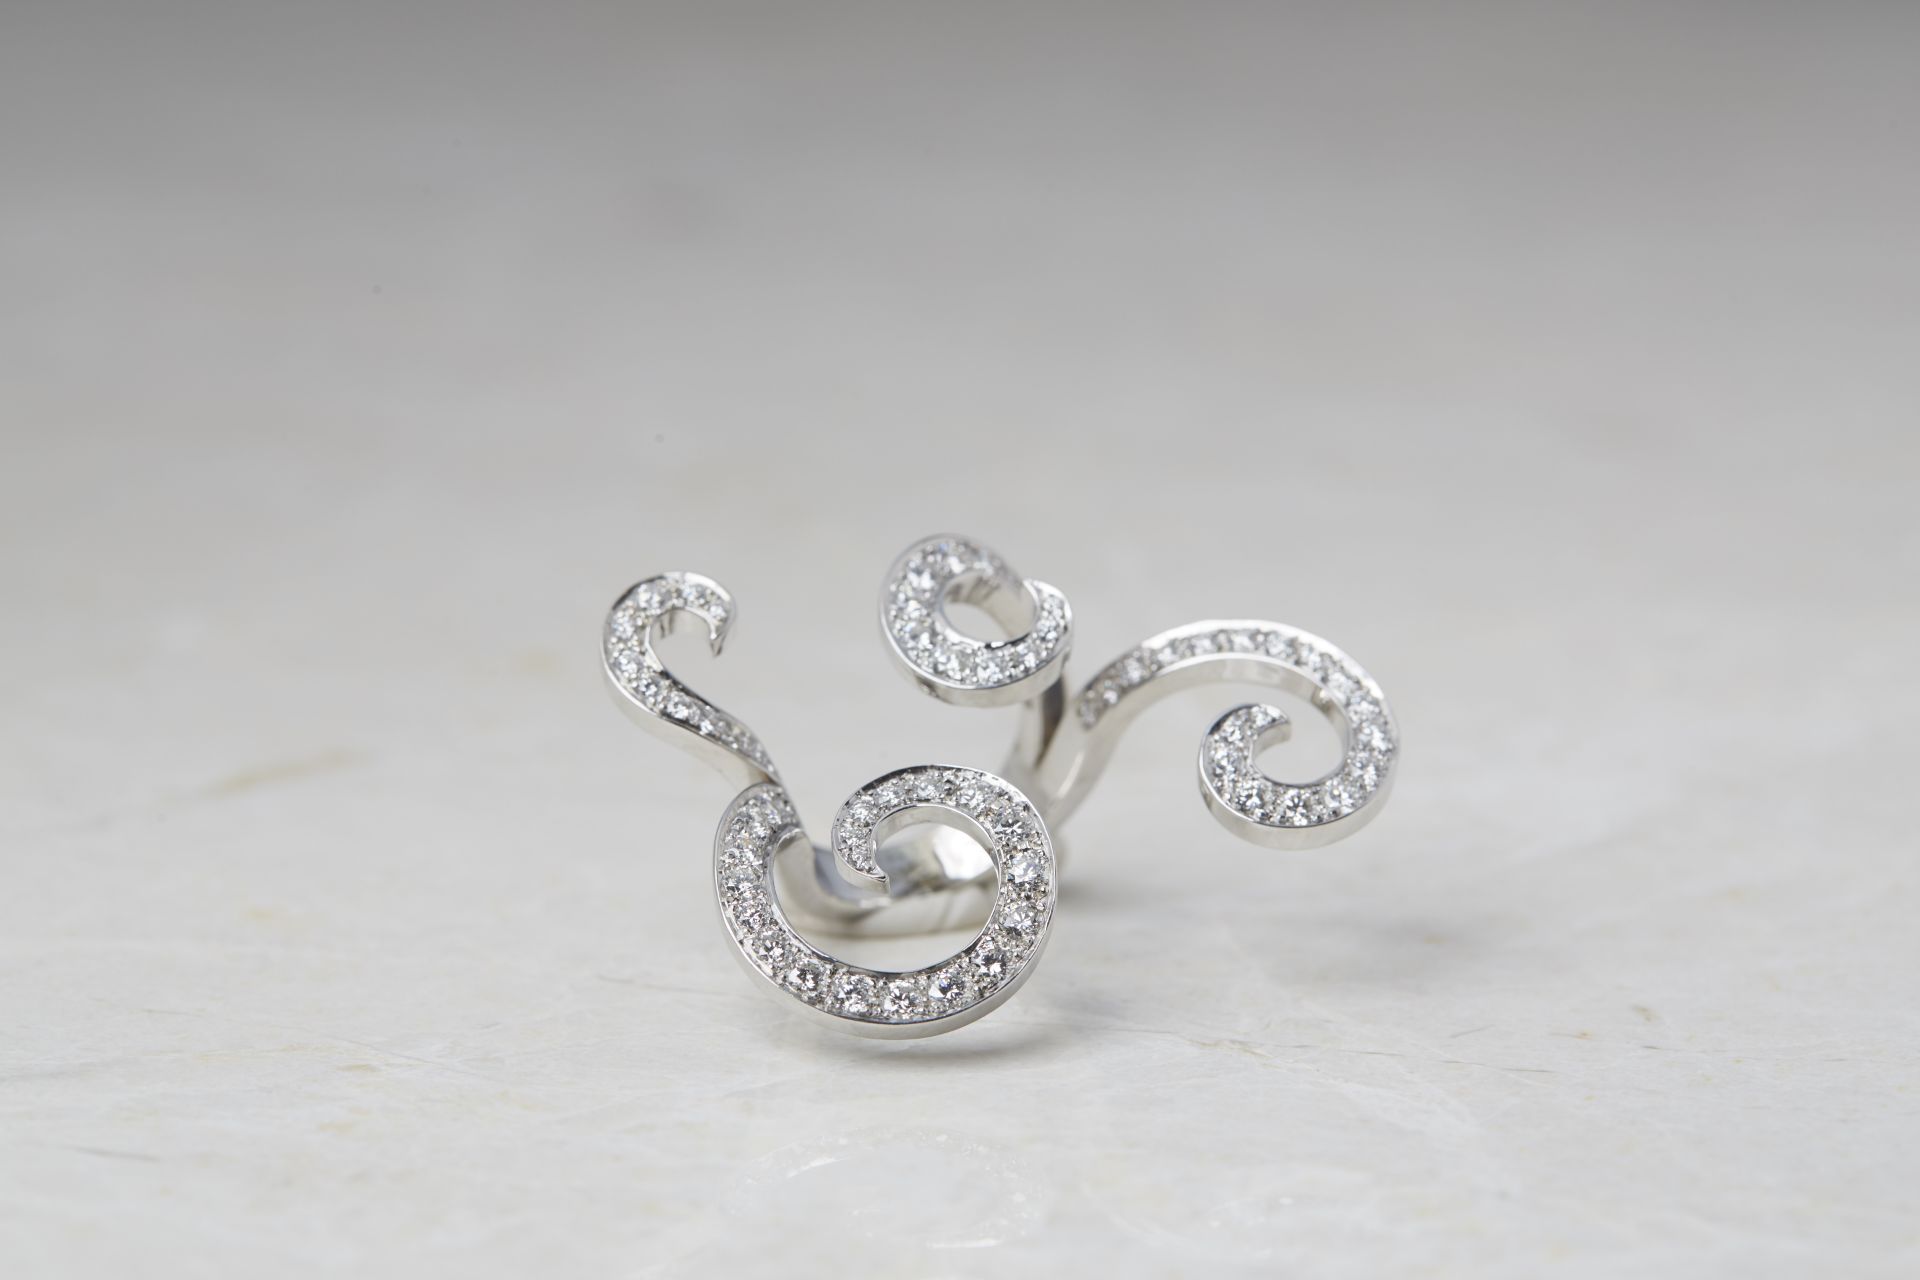 Van Cleef & Arpels 18k White Gold Diamond Oiseaux de Paradis Between The Finger Ring with VC&A. Box - Image 6 of 13